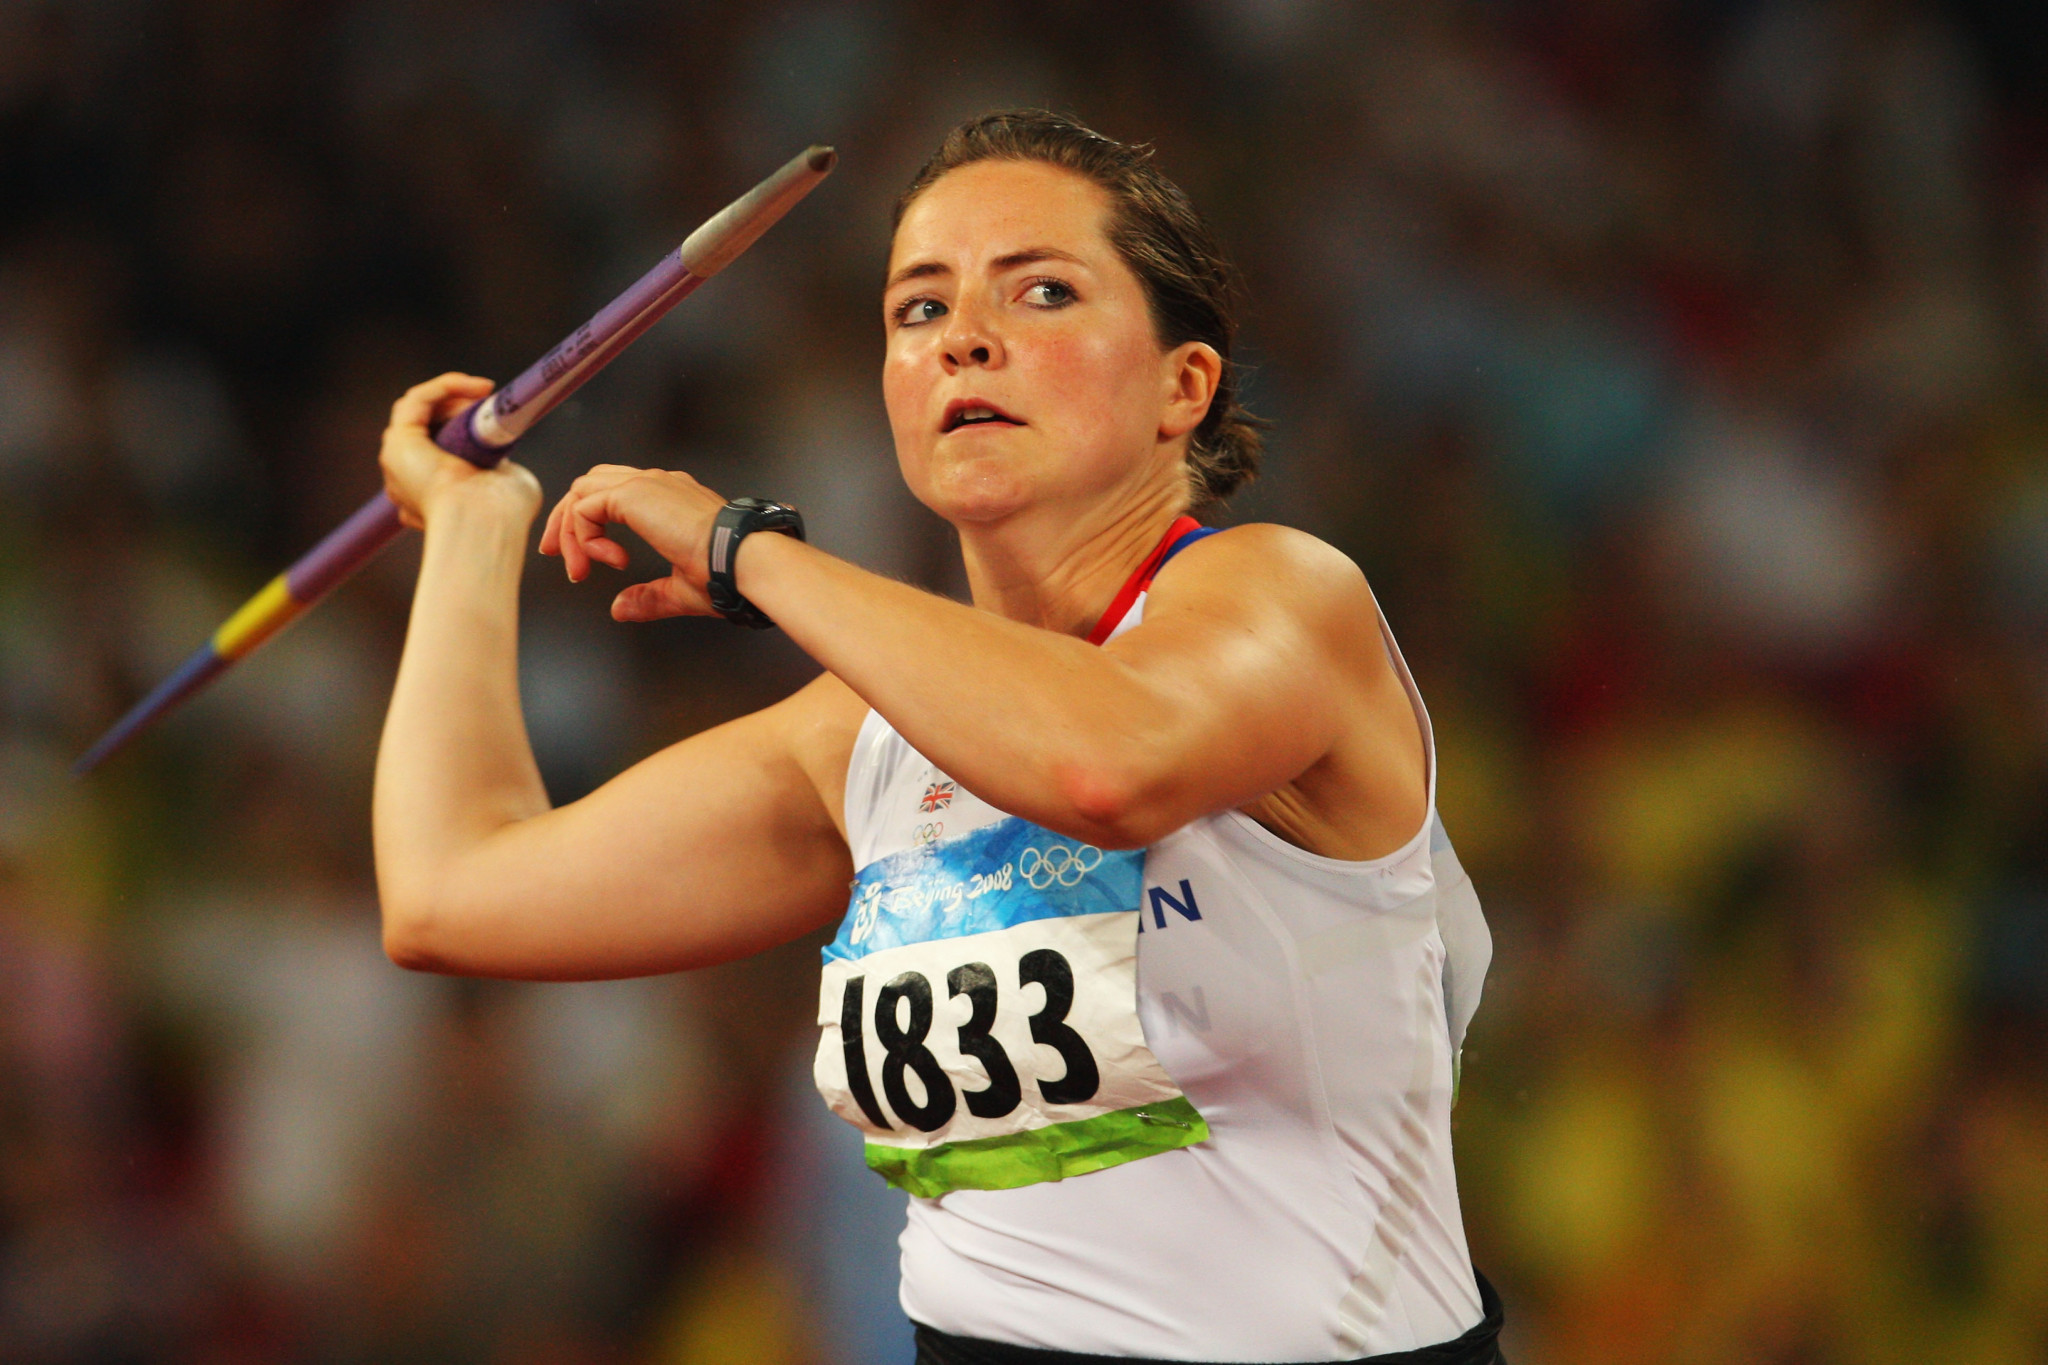 British javelin thrower to receive Beijing 2008 bronze medal at Anniversary Games in London